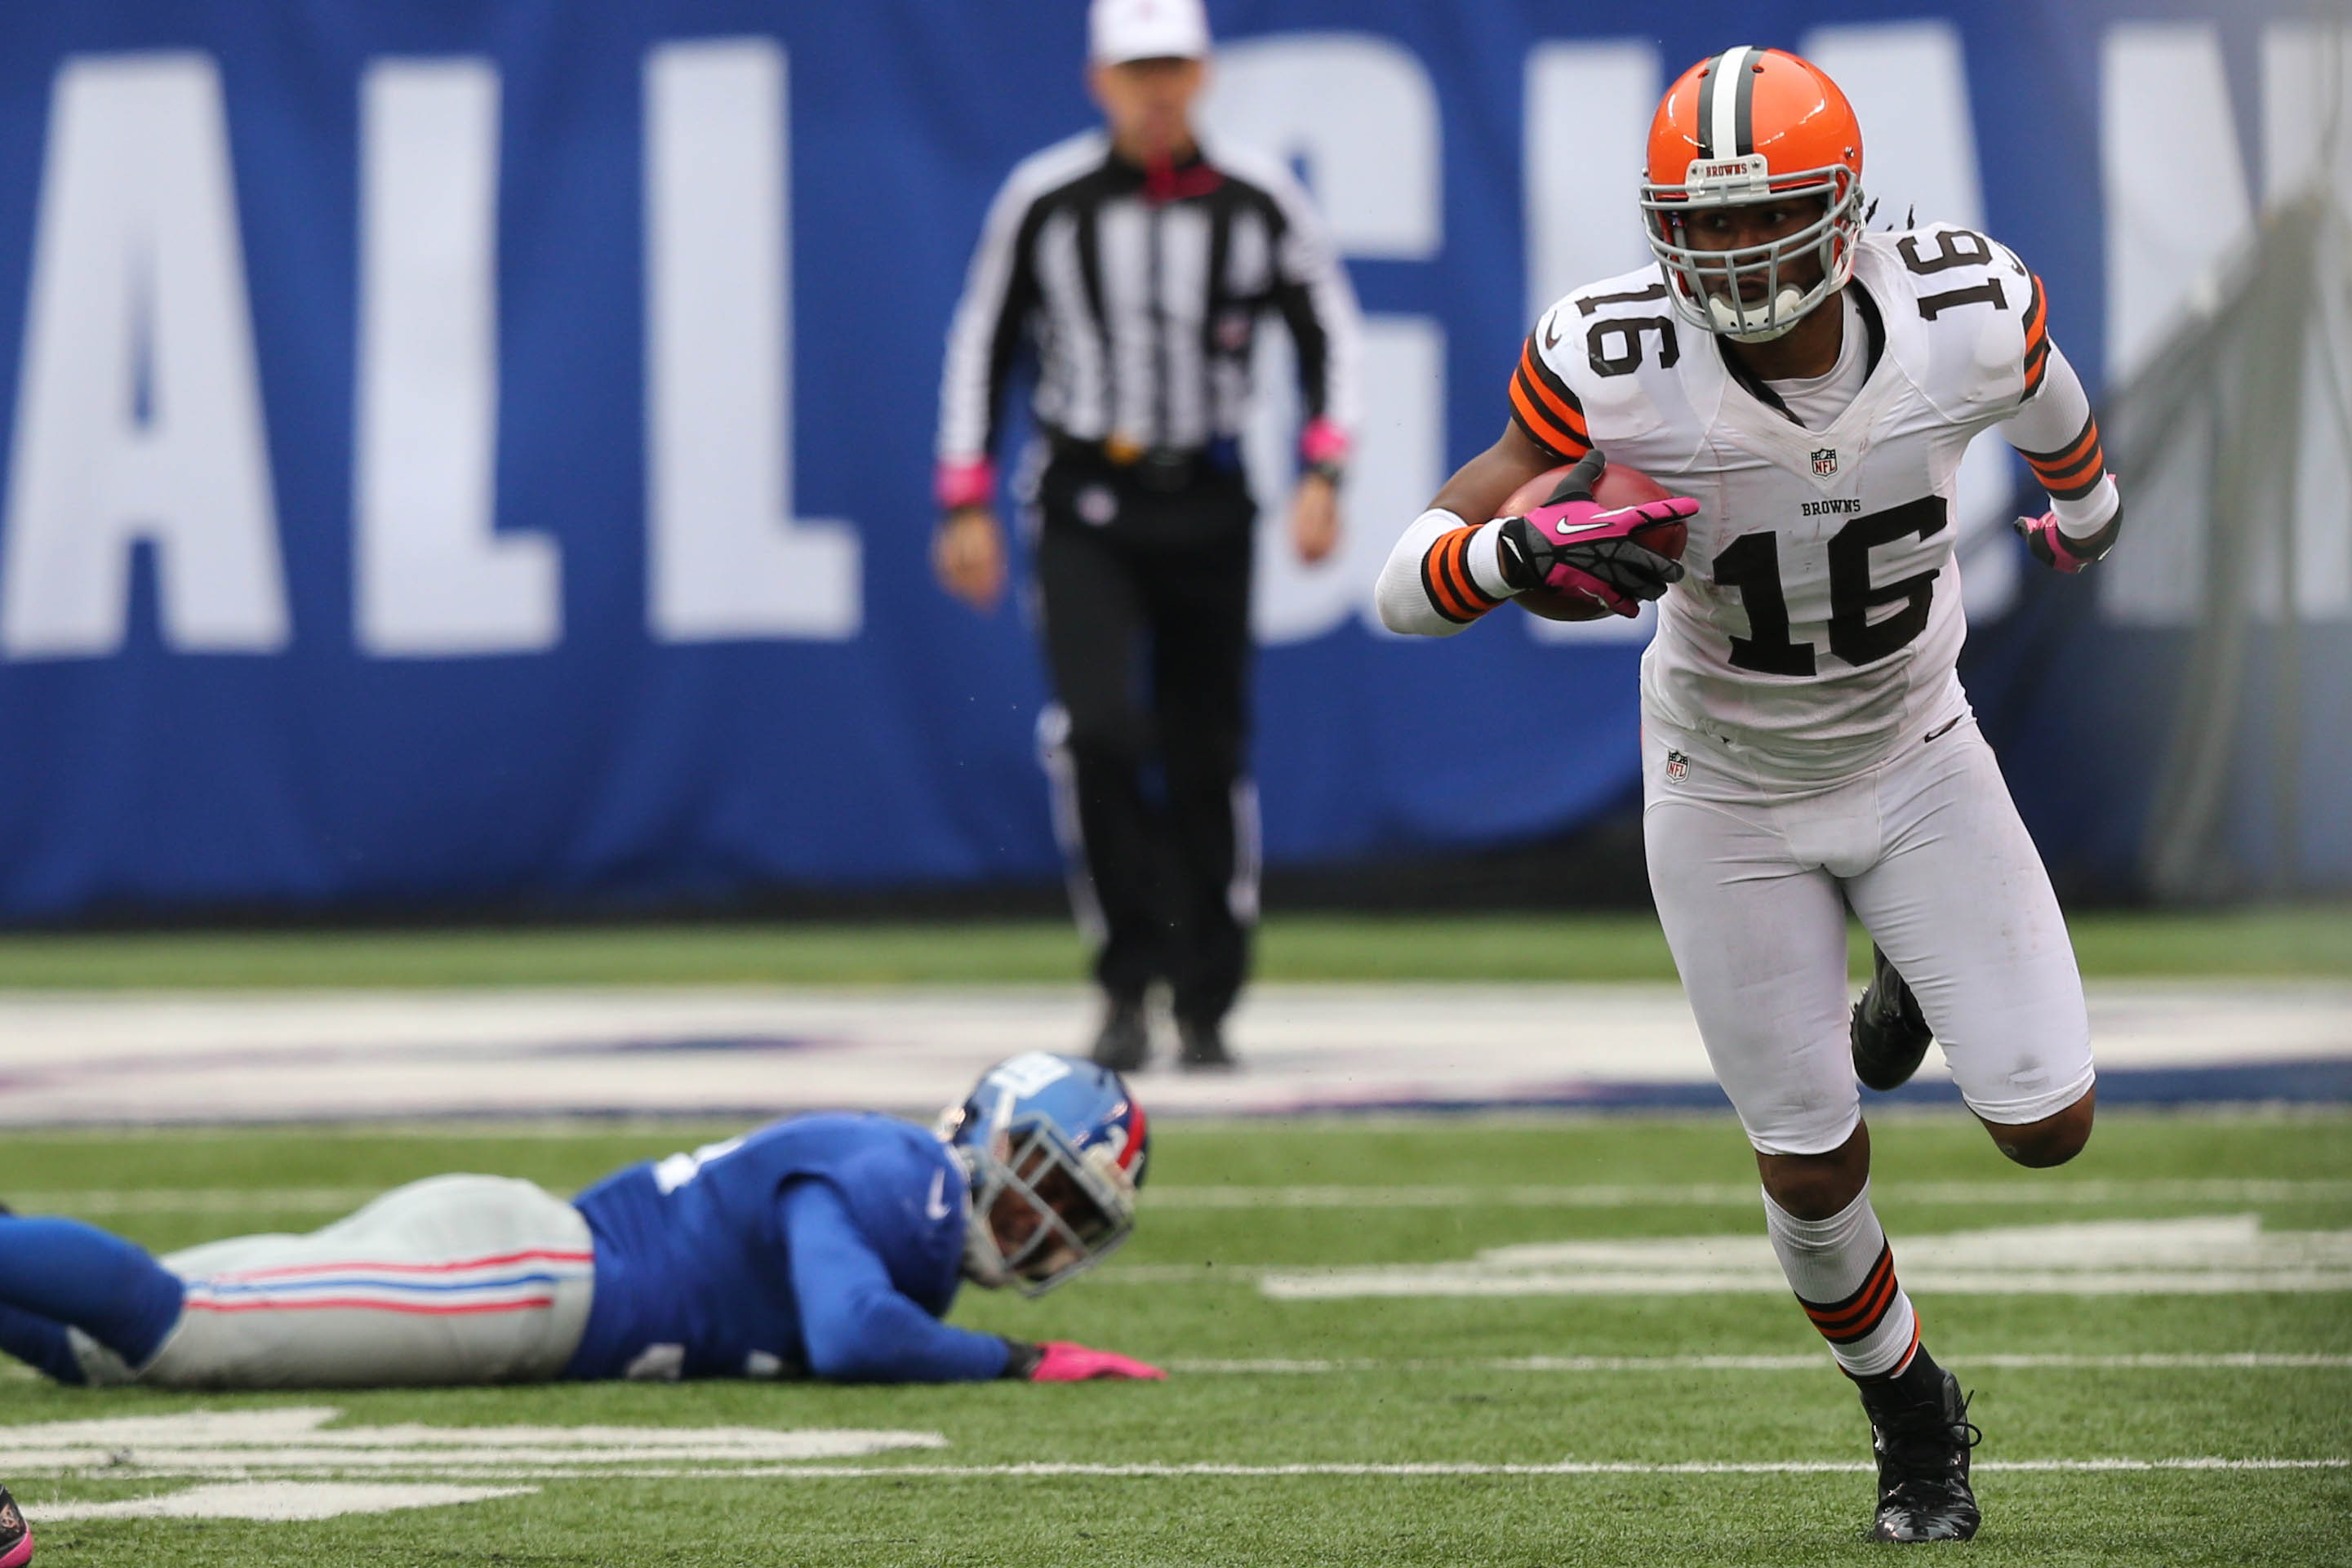 Cleveland Browns wide receiver Josh Cribbs, shown in 2012. (Photo: Anthony Gruppuso, USA TODAY Sports) 